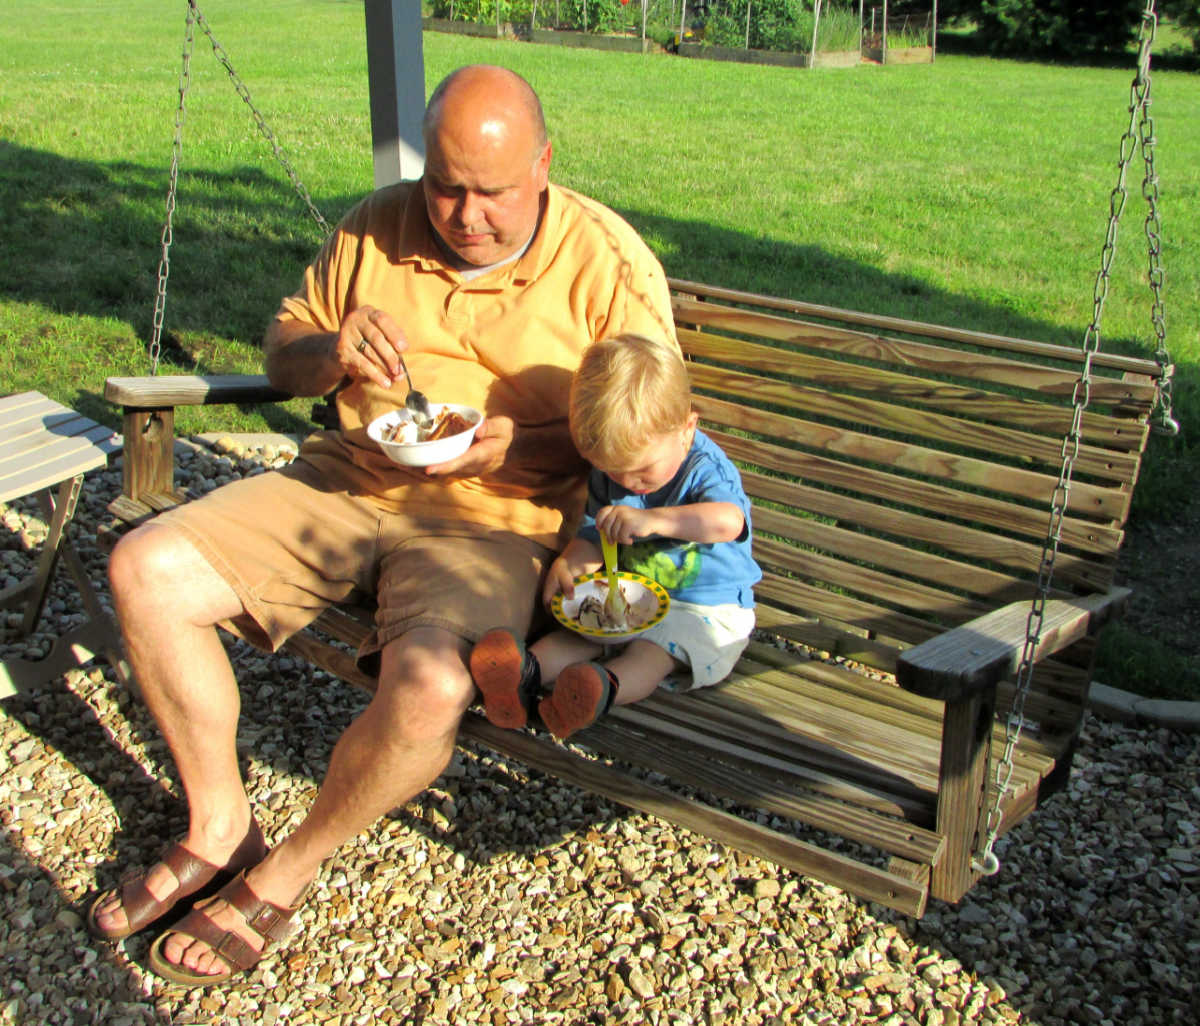 grandpa and grandson eating cake and ice cream on a porch swing.